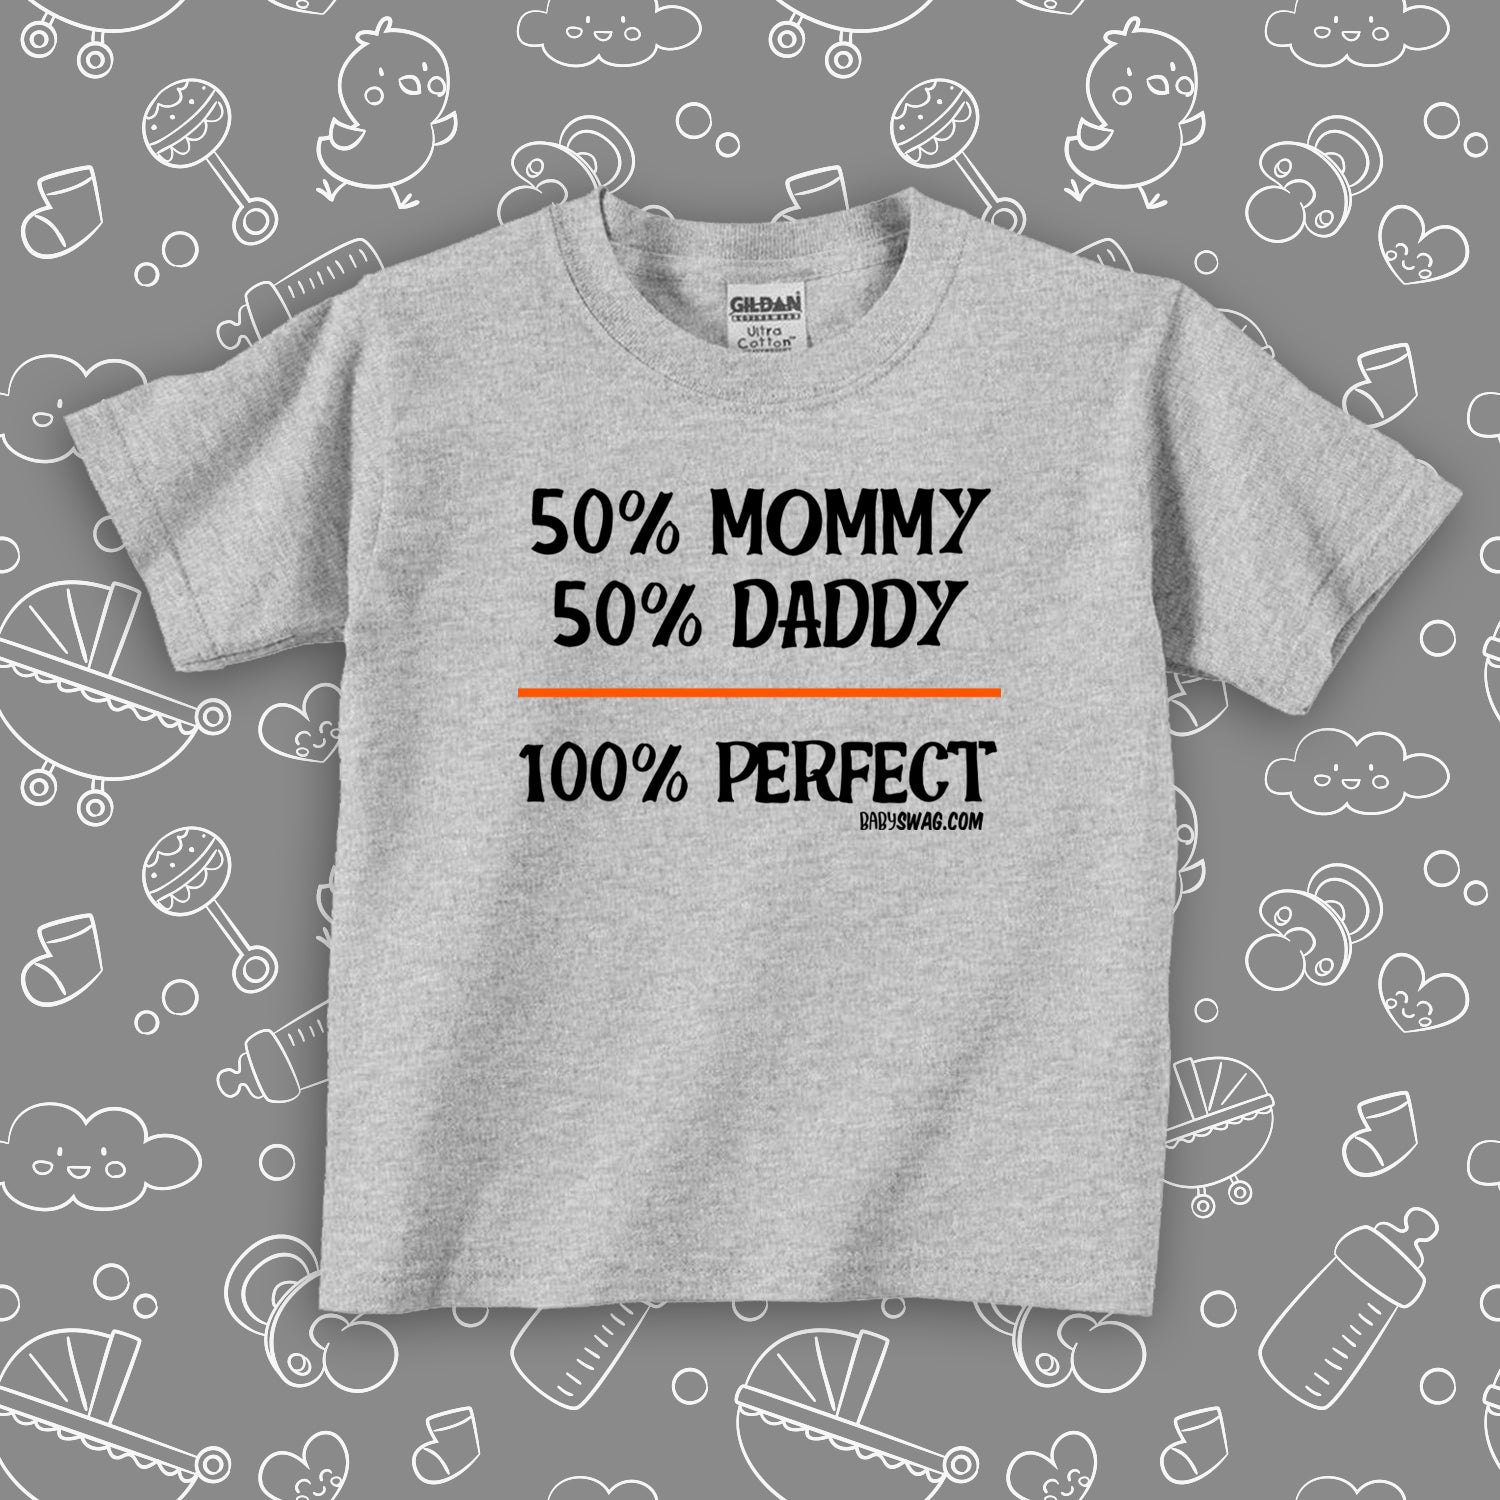 The ''50% Mommy, 50% Daddy, 100% Perfect'' funny toddler shirts in grey.